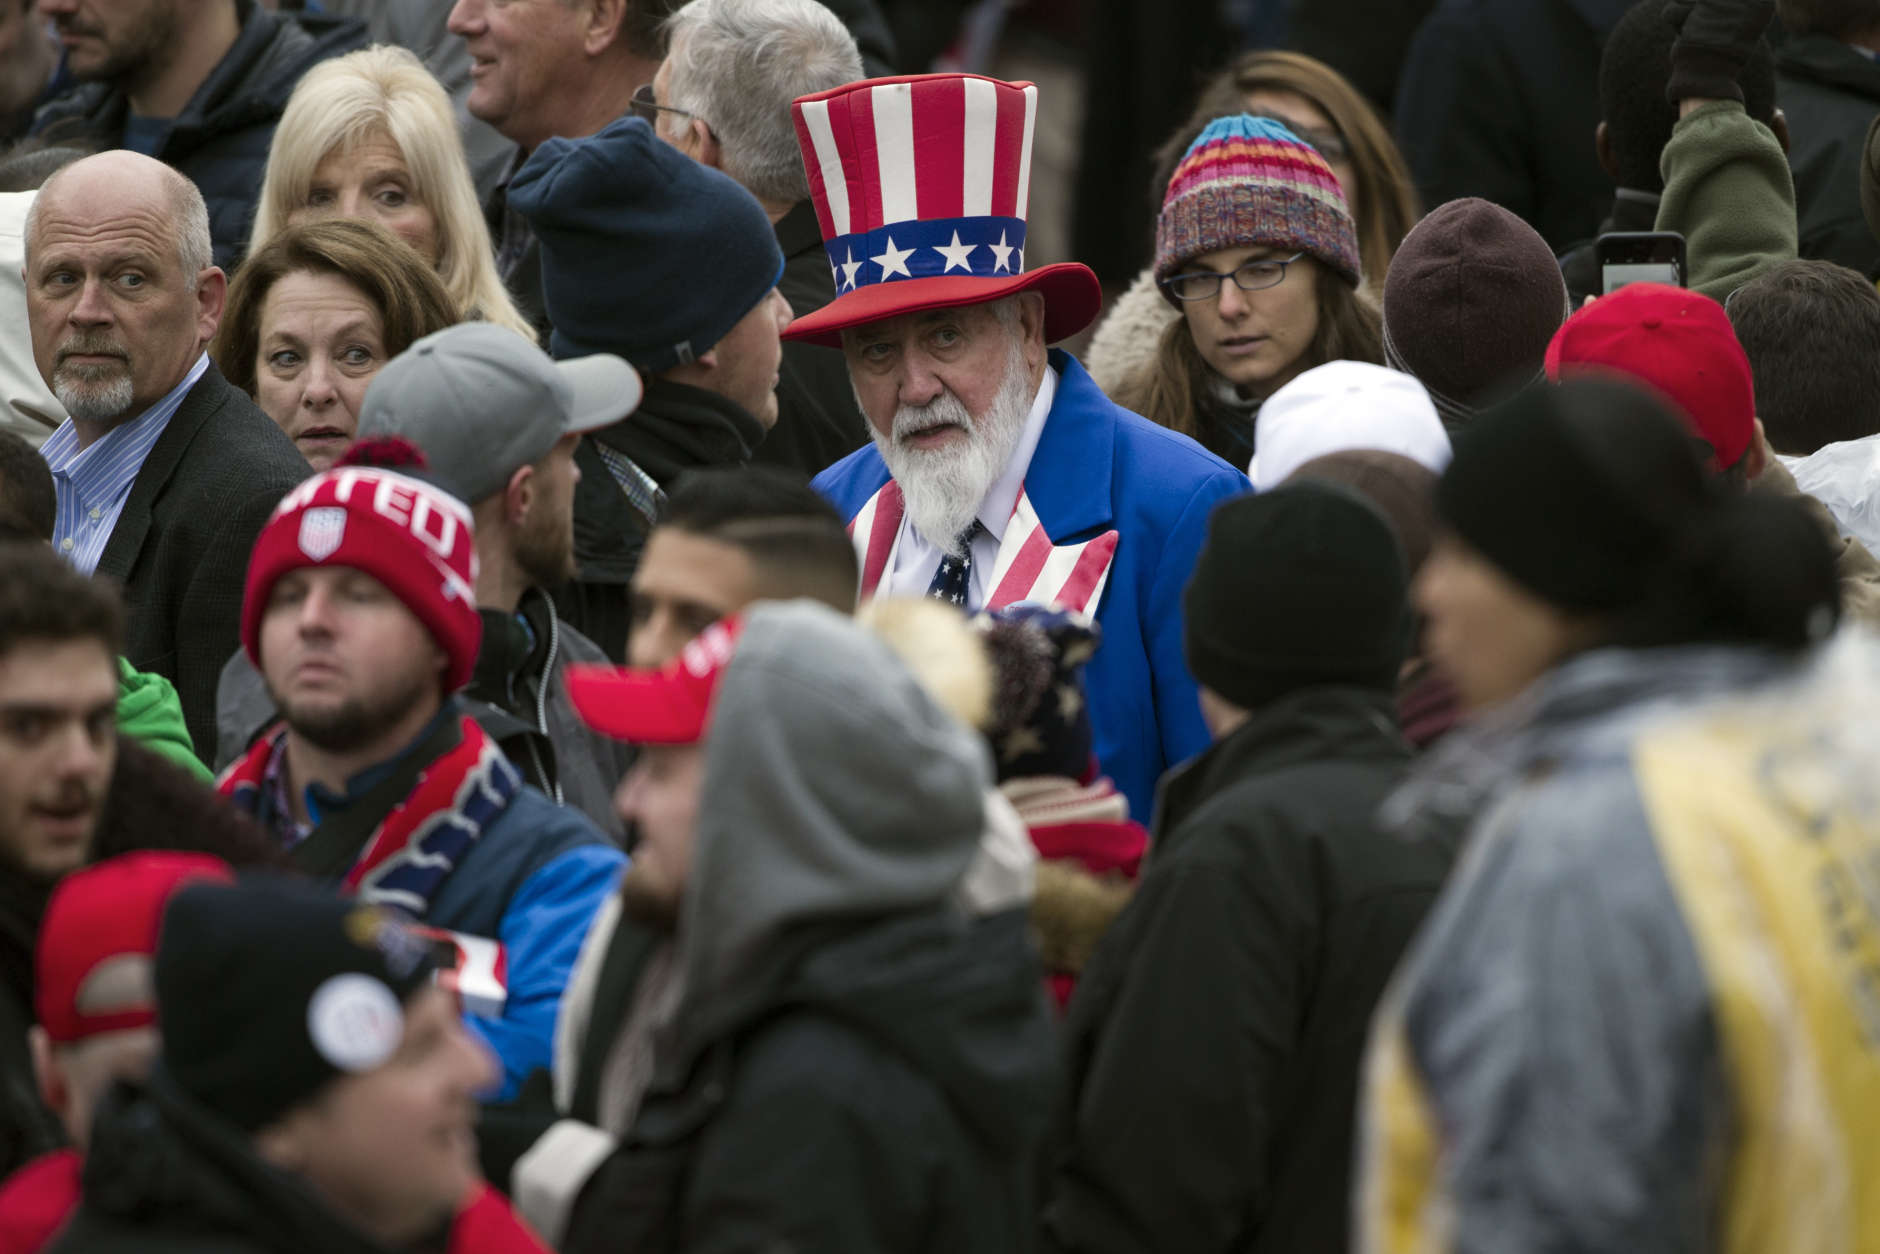 A man dressed as Uncle Sam walks through the crowd as they wait on Pennsylvania Avenue in Washington, Friday, Jan. 20,2017,  for the start of the President Donald Trump's Inaugural Parade. (AP Photo/Cliff Owen)